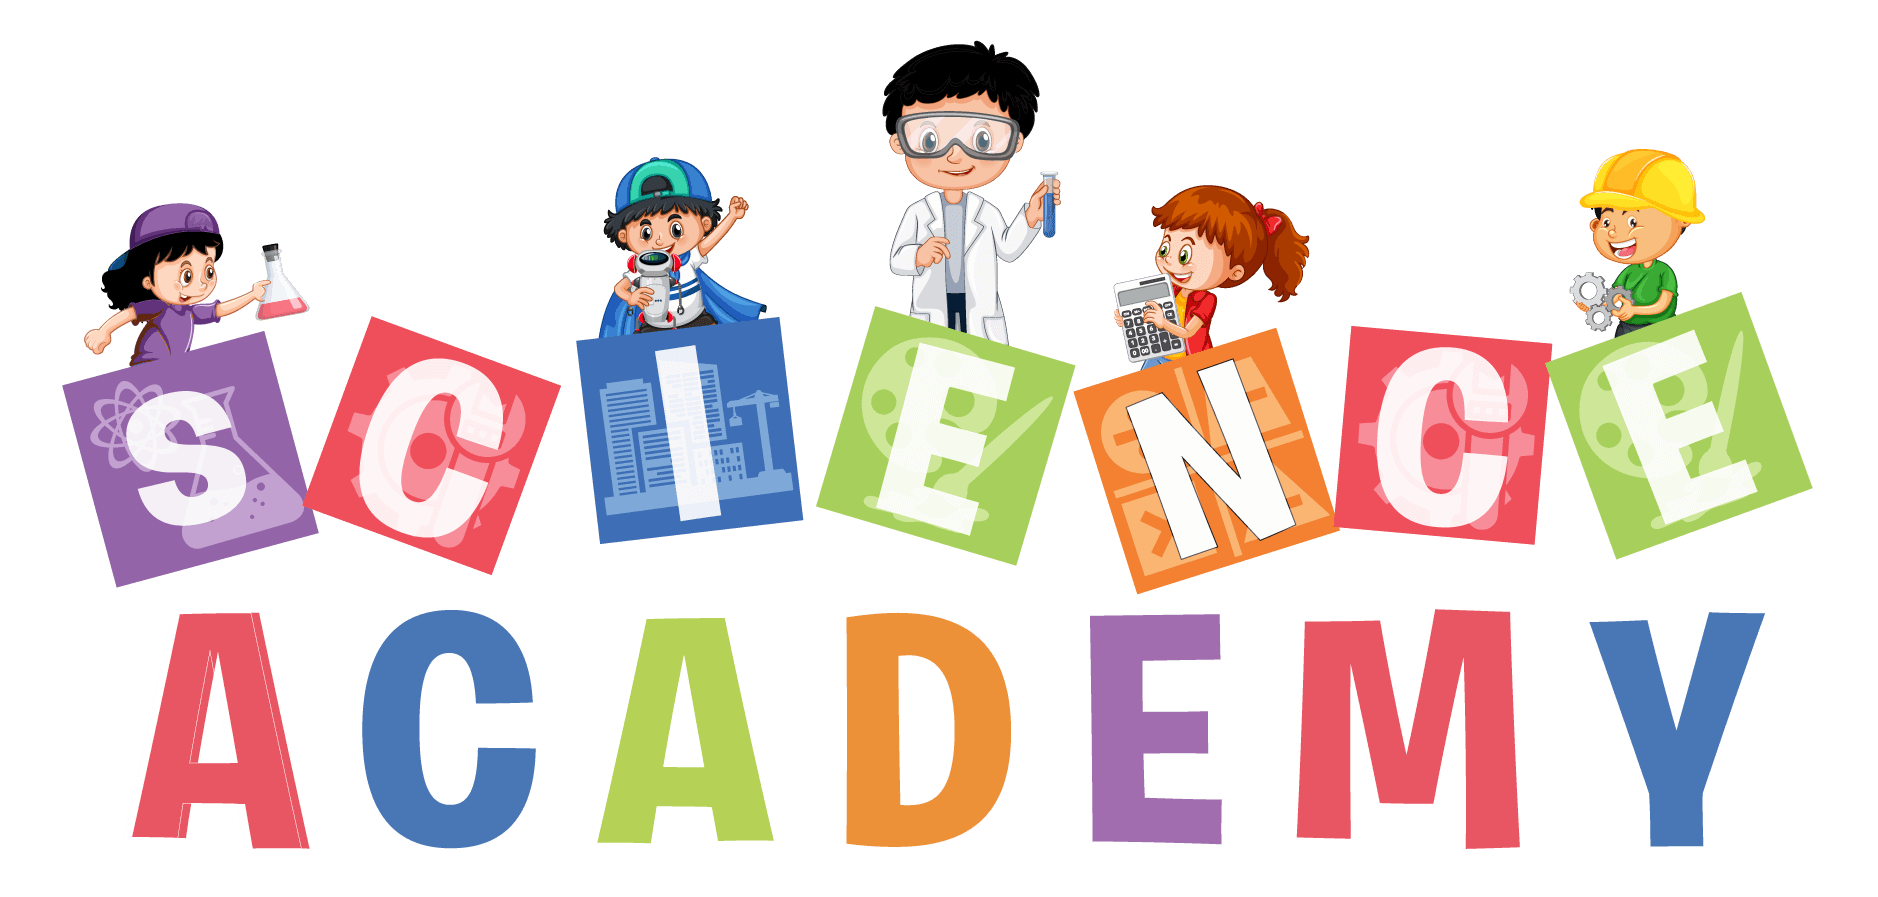 Science Academy